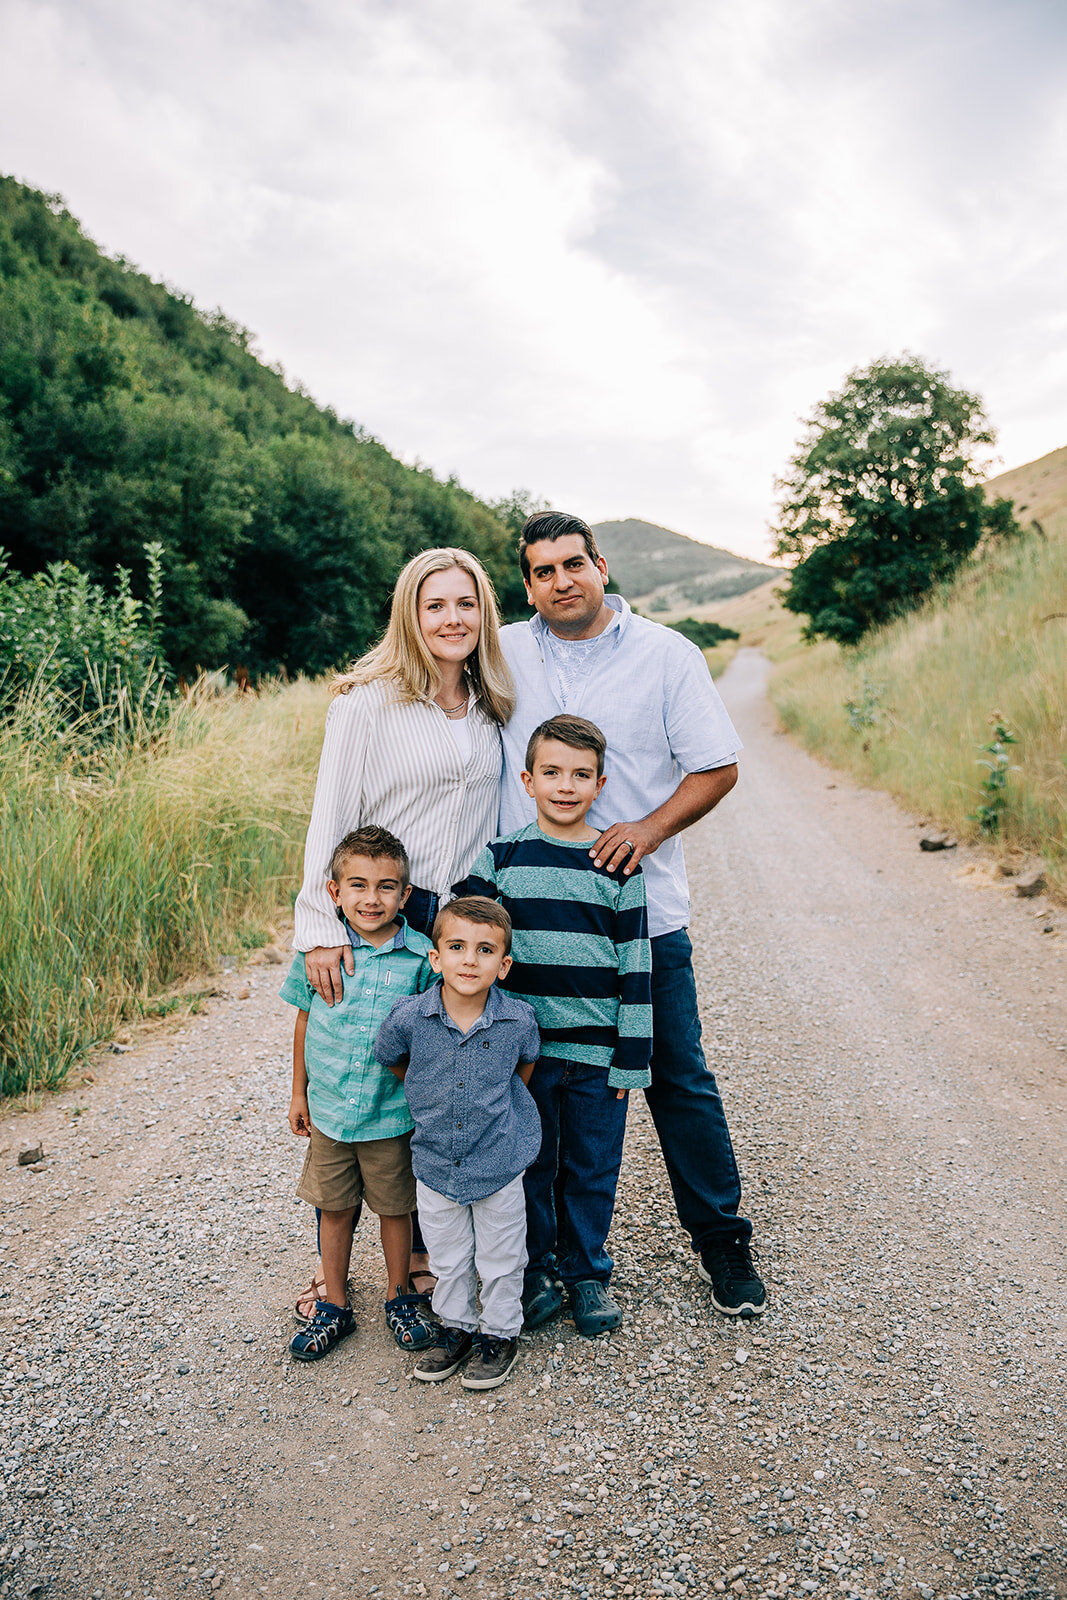  family posed together for family photos extended family pictures by bella alder photography family posing on a road mom dad and three sons navy and mint stripes shades of blue outfit ideas for coordinating outfit inspo for family pictures in hyrum u